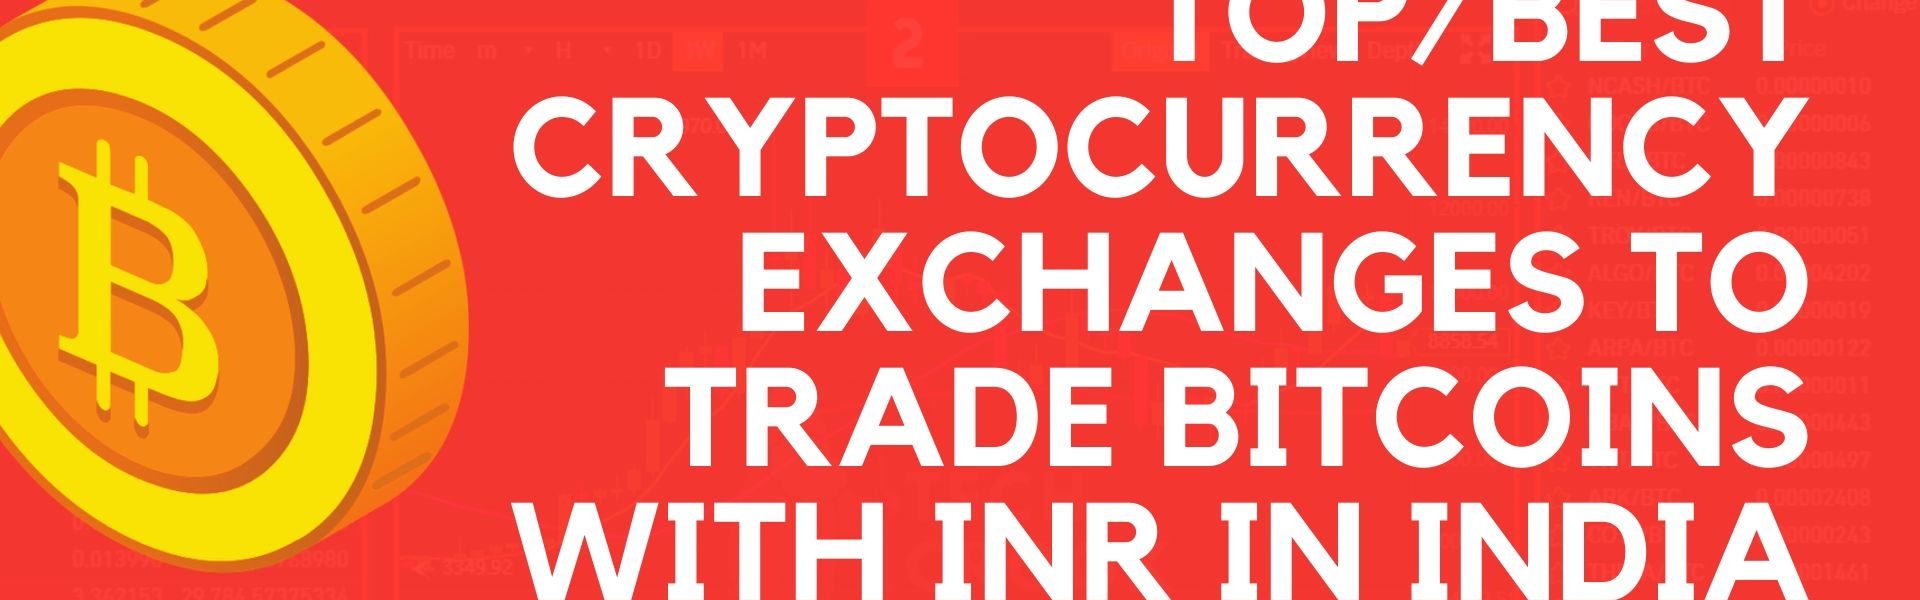 top Cryptocurrency exchanges in India bitcon list